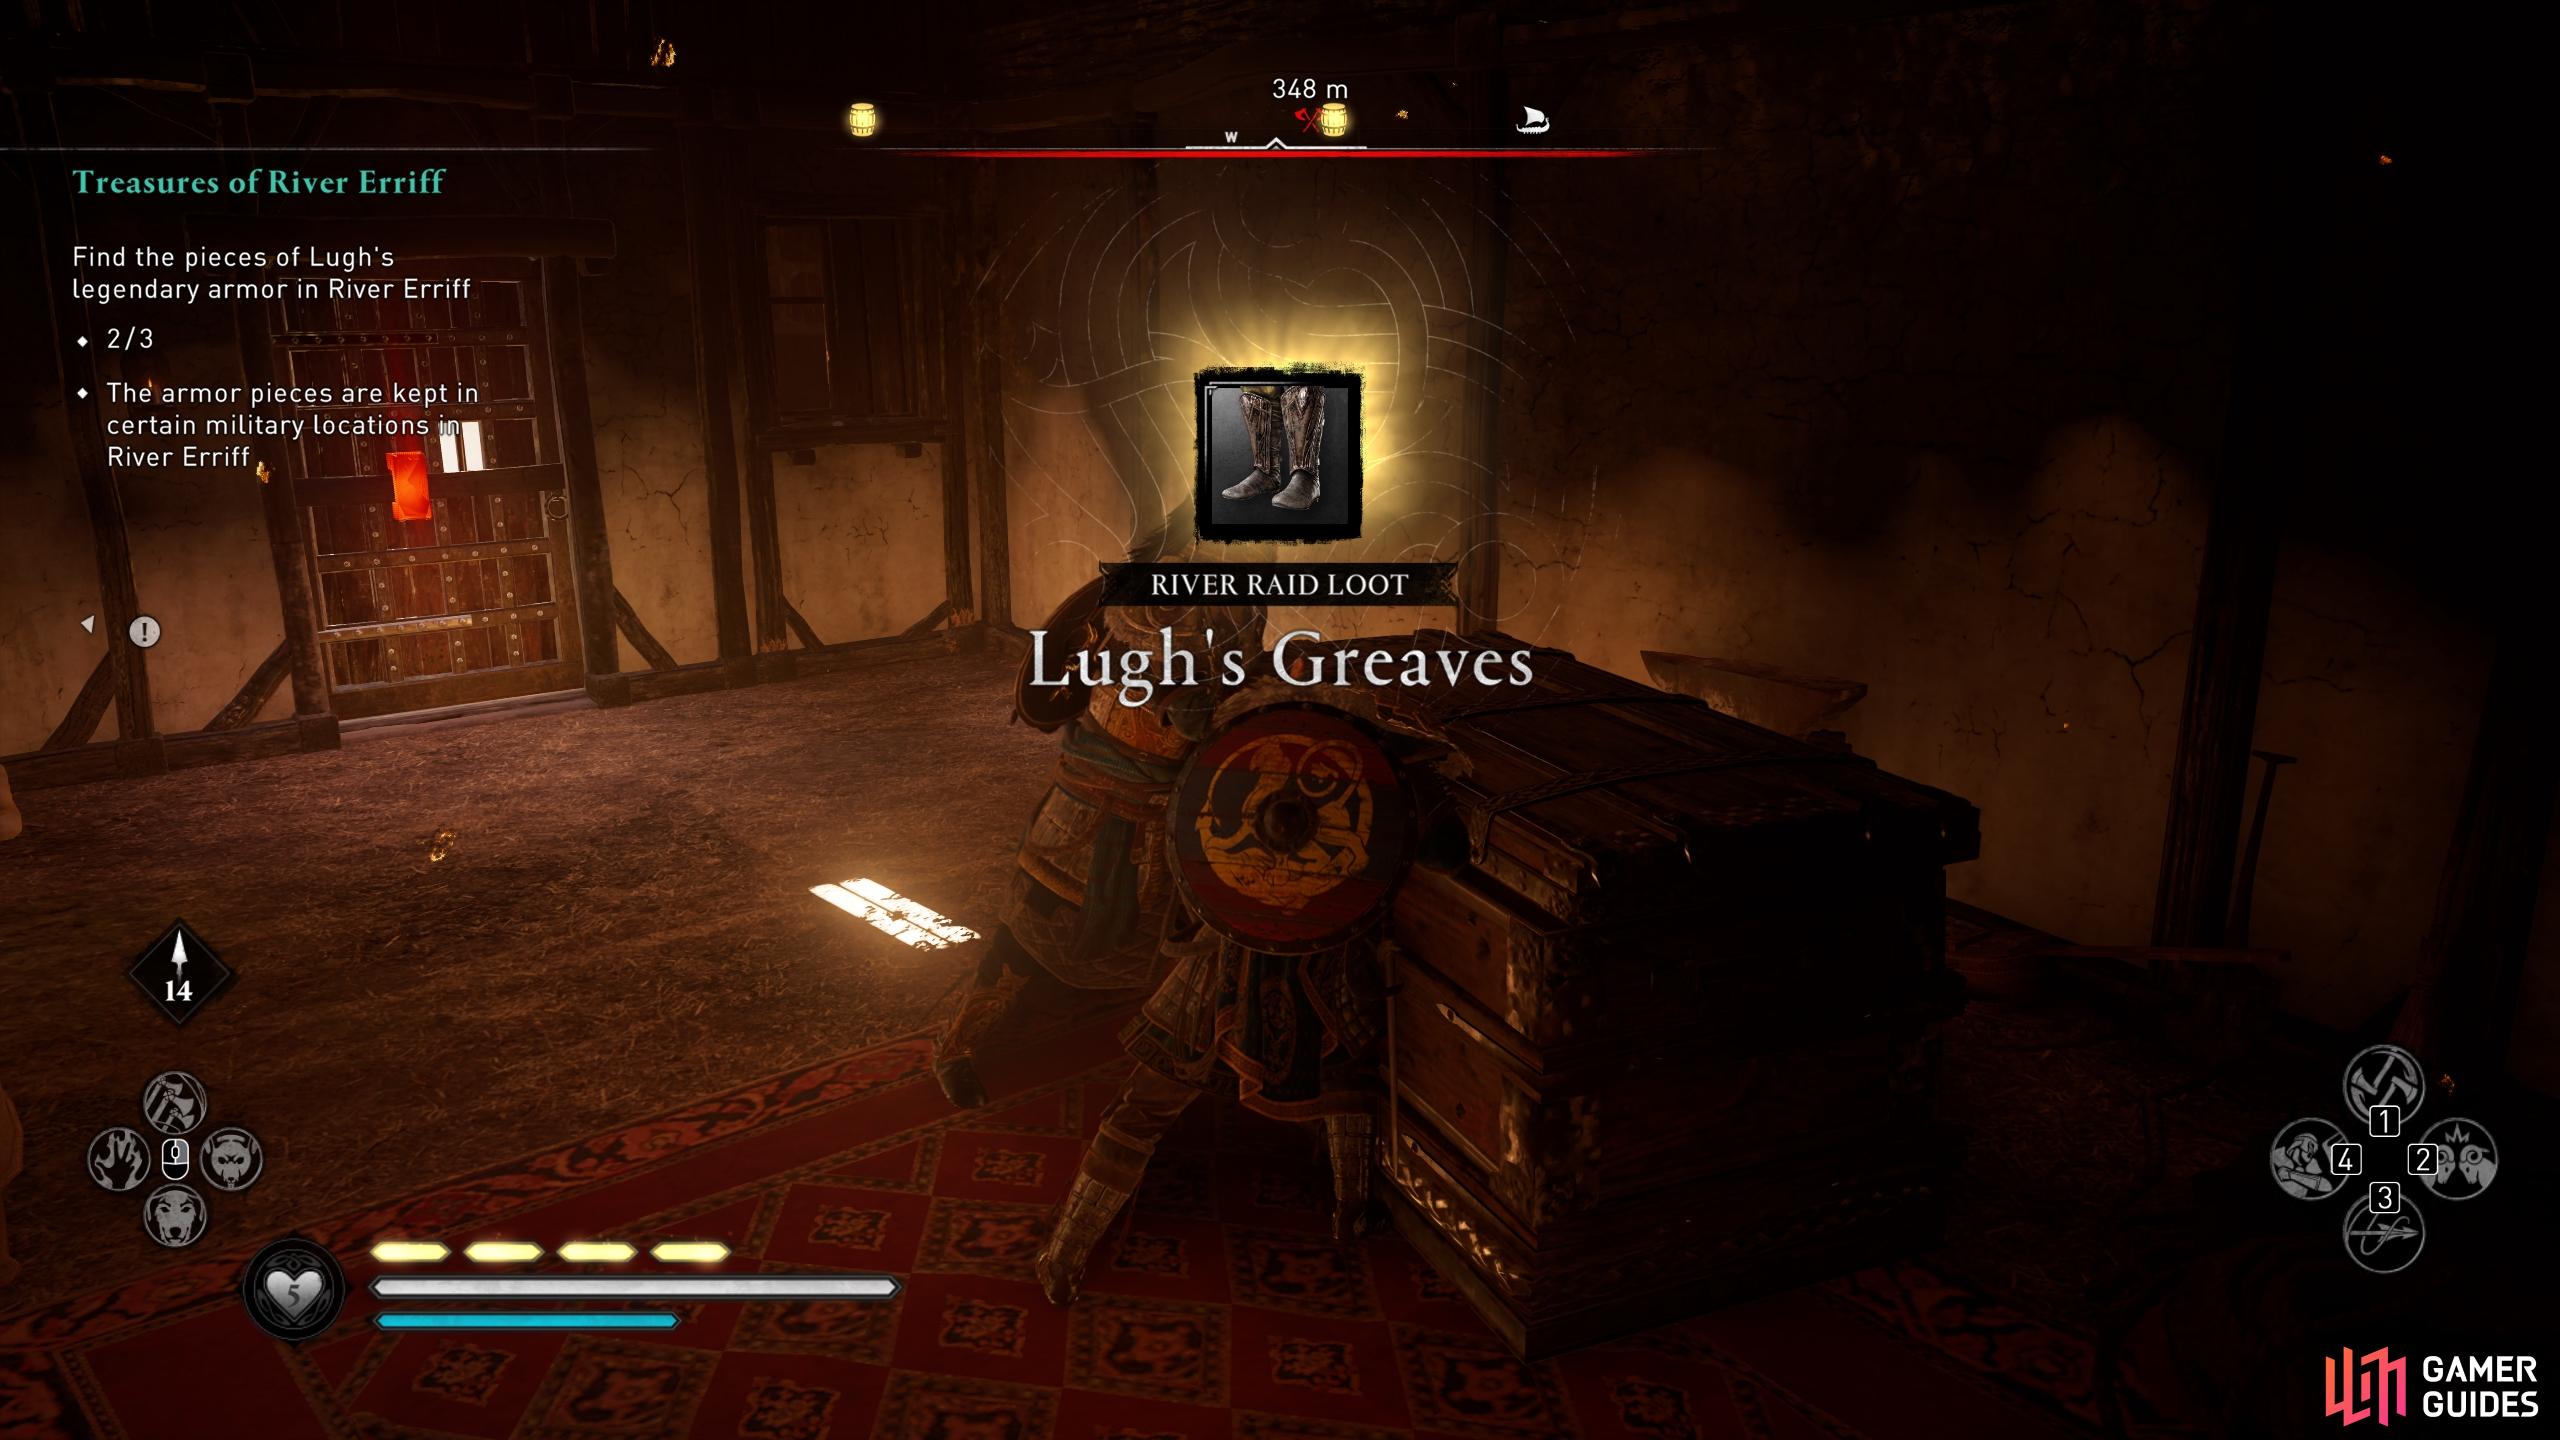 You'll find Lugh's Greaves in a regular wealth chest.